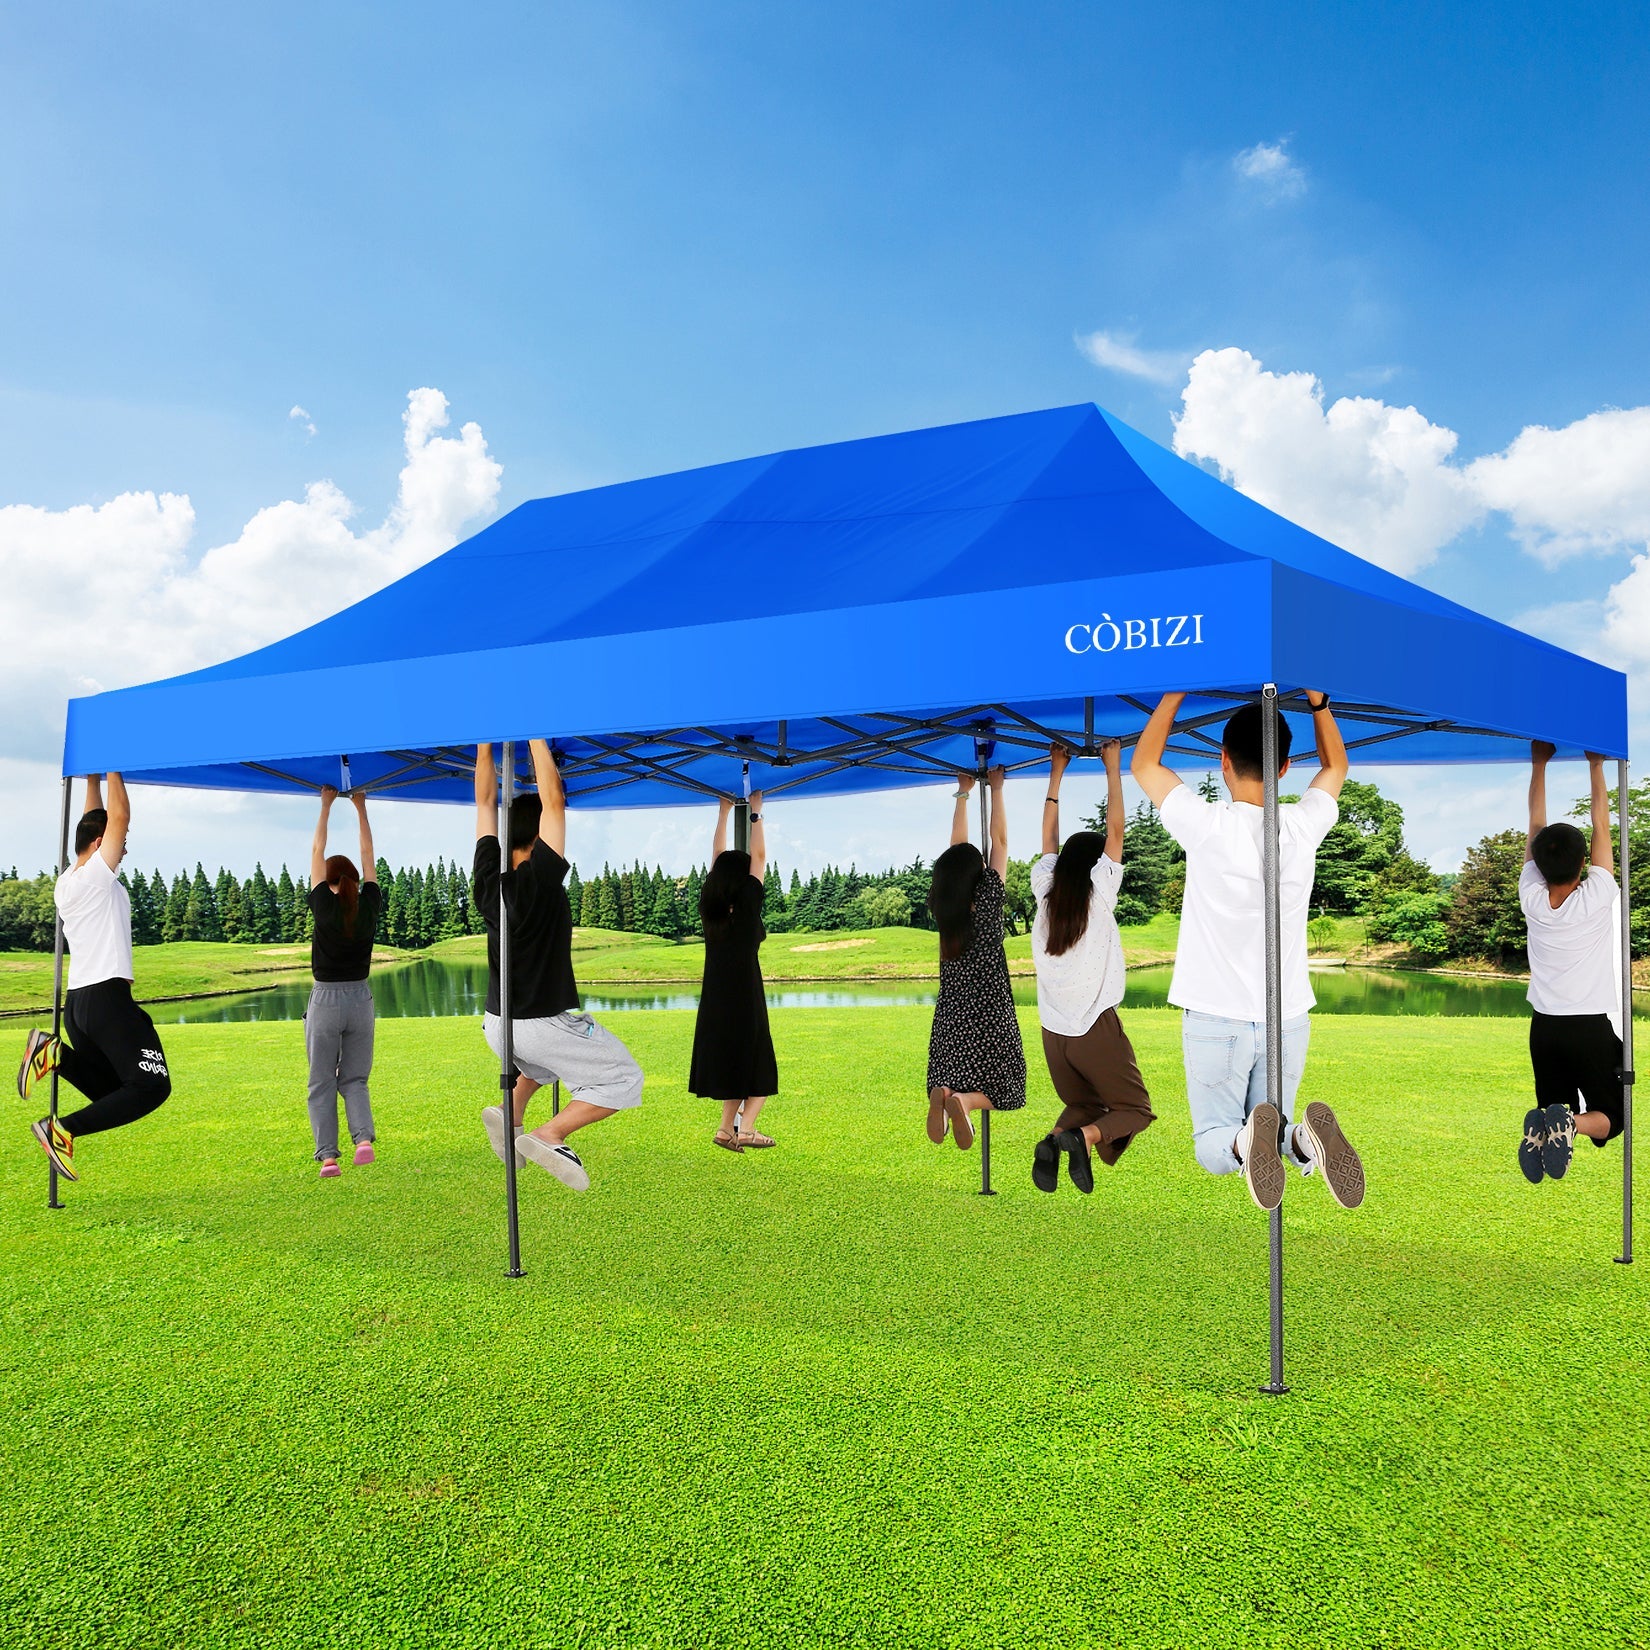 10'x20' Canopy EZ Pop Up Canopy Anti-UV Waterproof Outdoor Tent Portable Party Commercial Instant Canopy Shelter Height Adjustable Tent Gazebo with 6 Removable Sidewalls, 6 Sandbags, Roller Bag, Blue